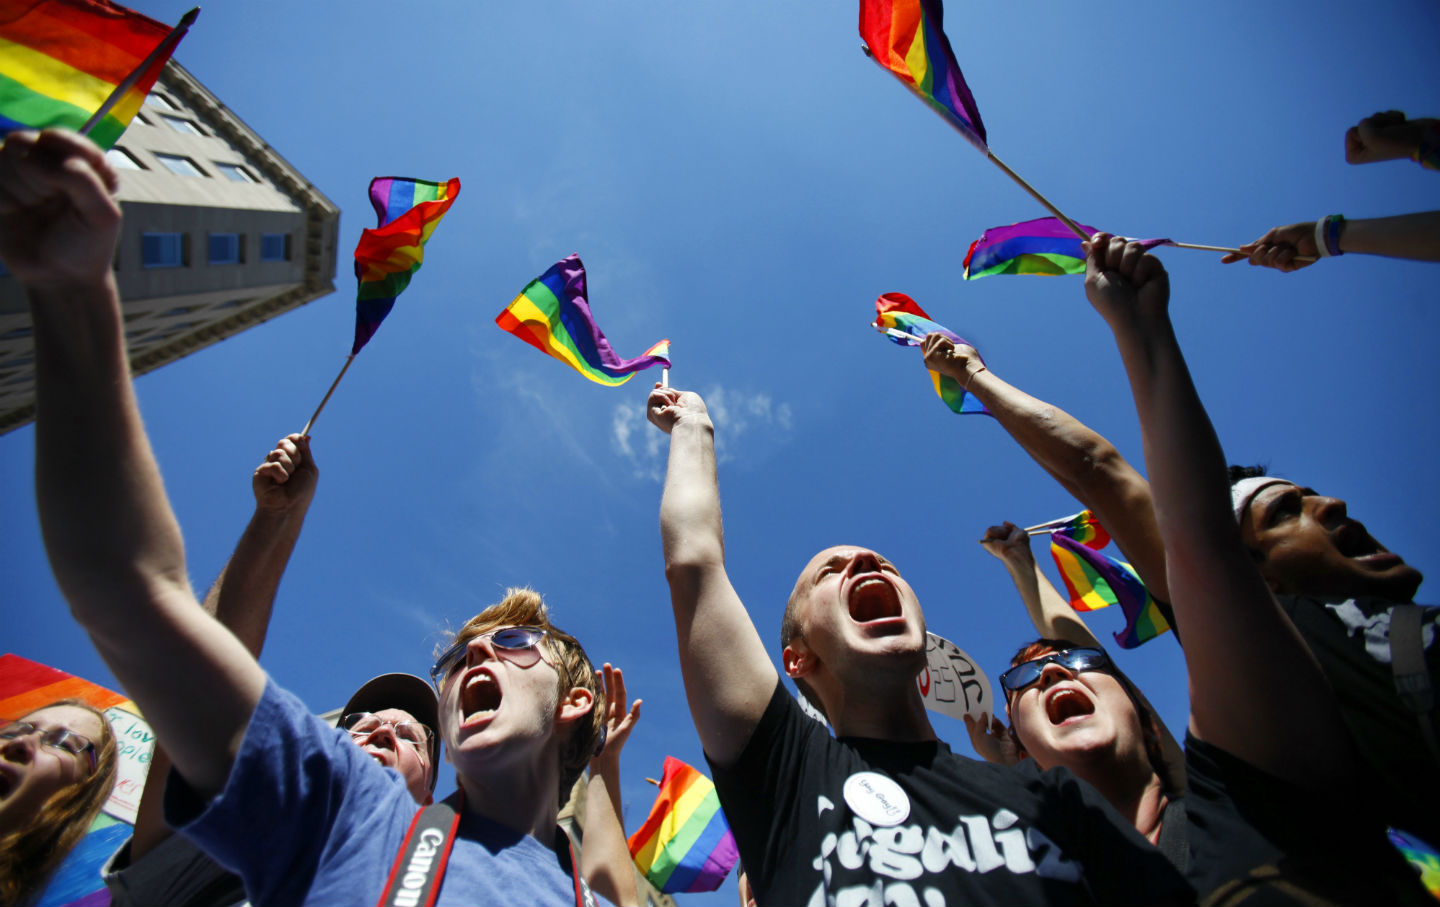 What’s Next for the LGBT Movement?